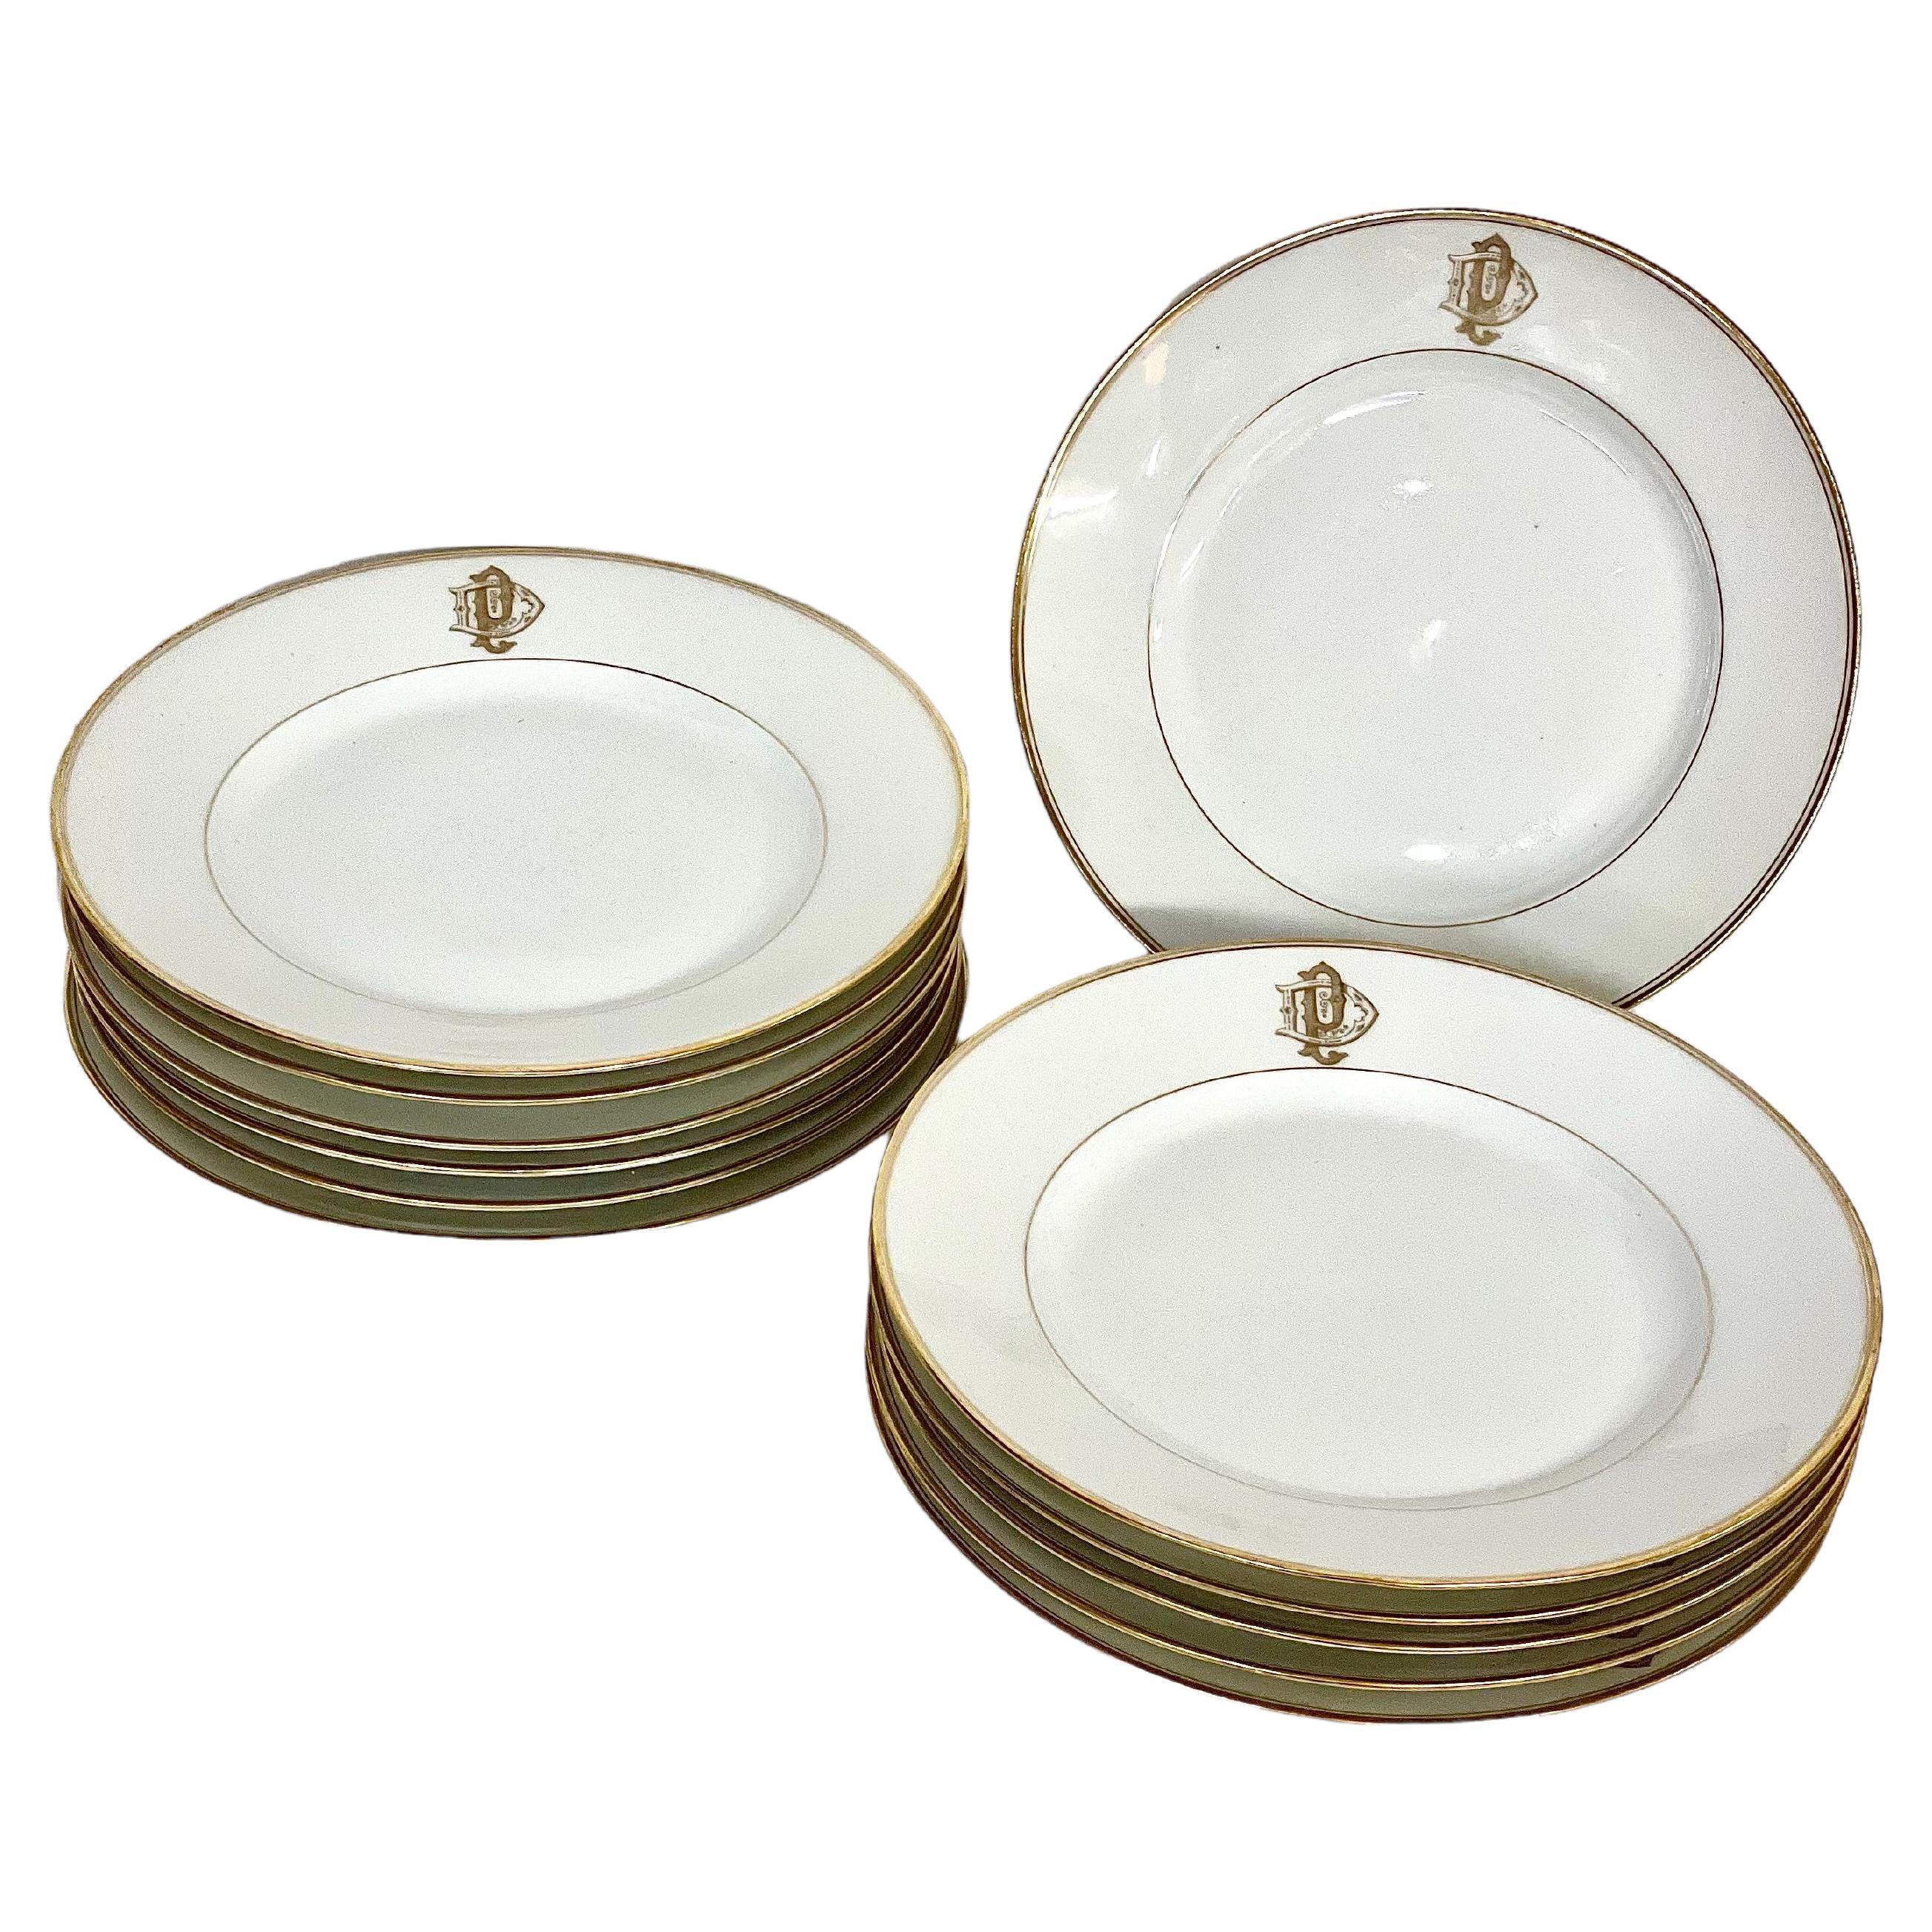 Limoges Porcelain Set of 12 Dinner Plates with Gilt Edges and Monogramme For Sale